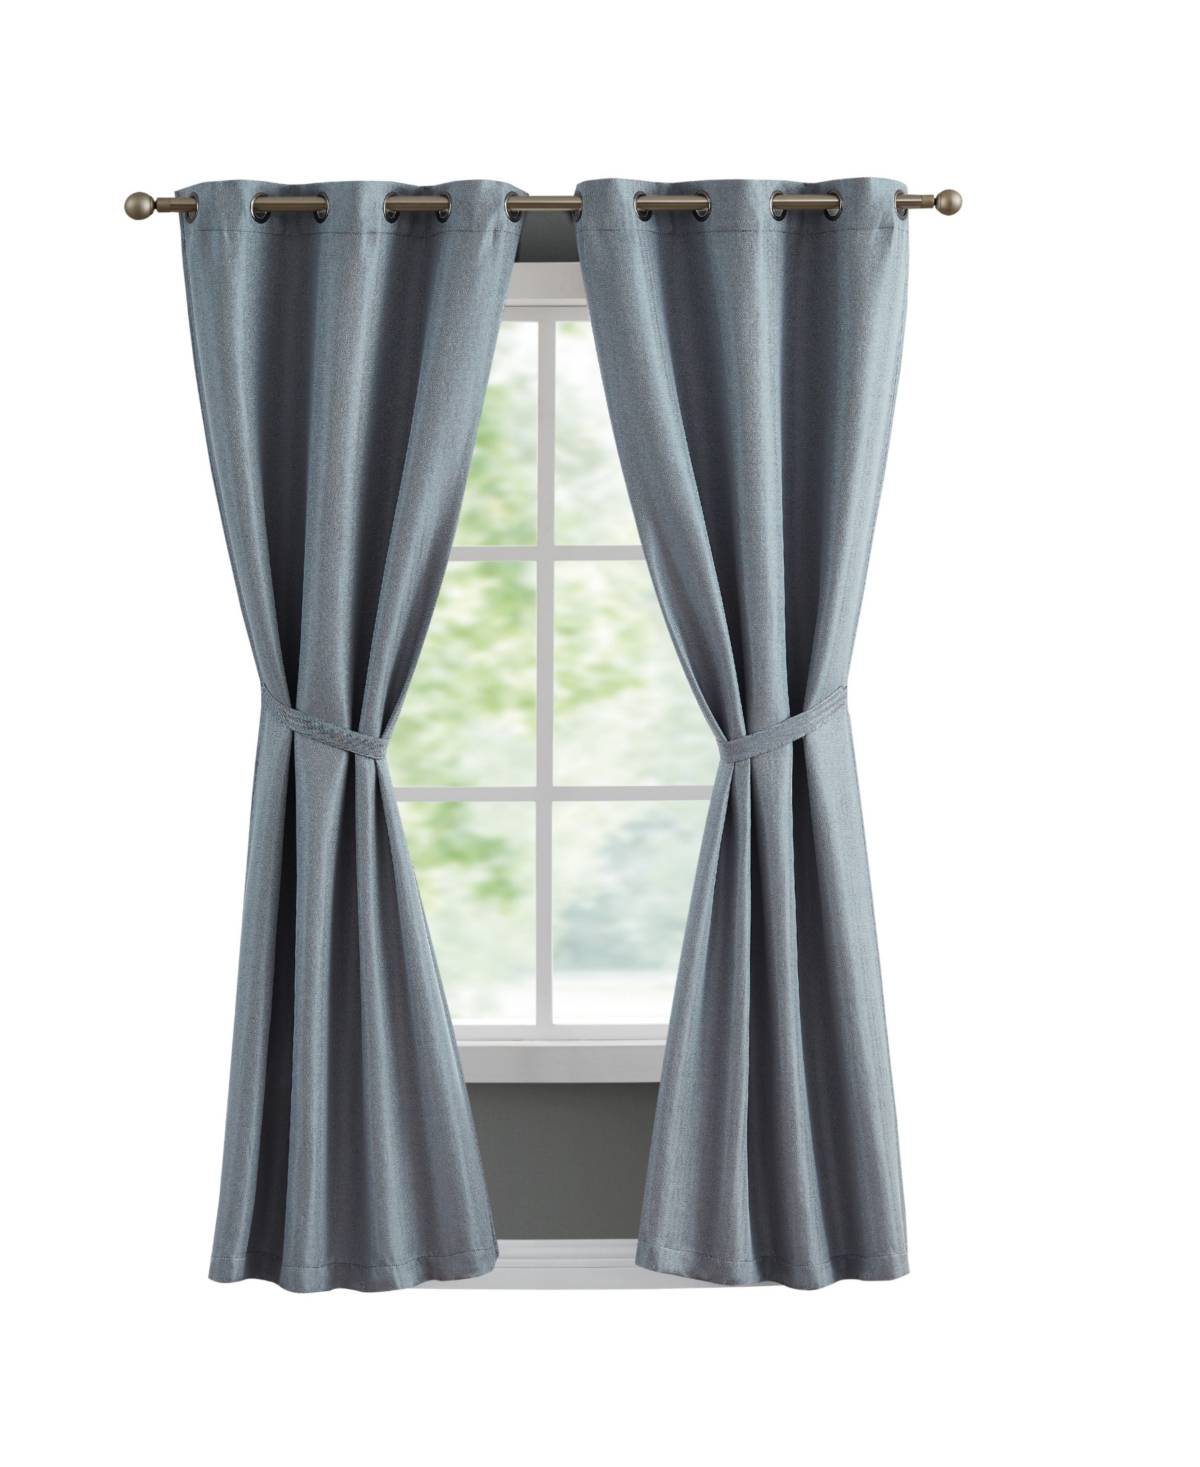 French Connection Tanner Thermal Woven Room Darkening Grommet Window Curtain Panel Pair With Tiebacks, 38" X 84" In Gray